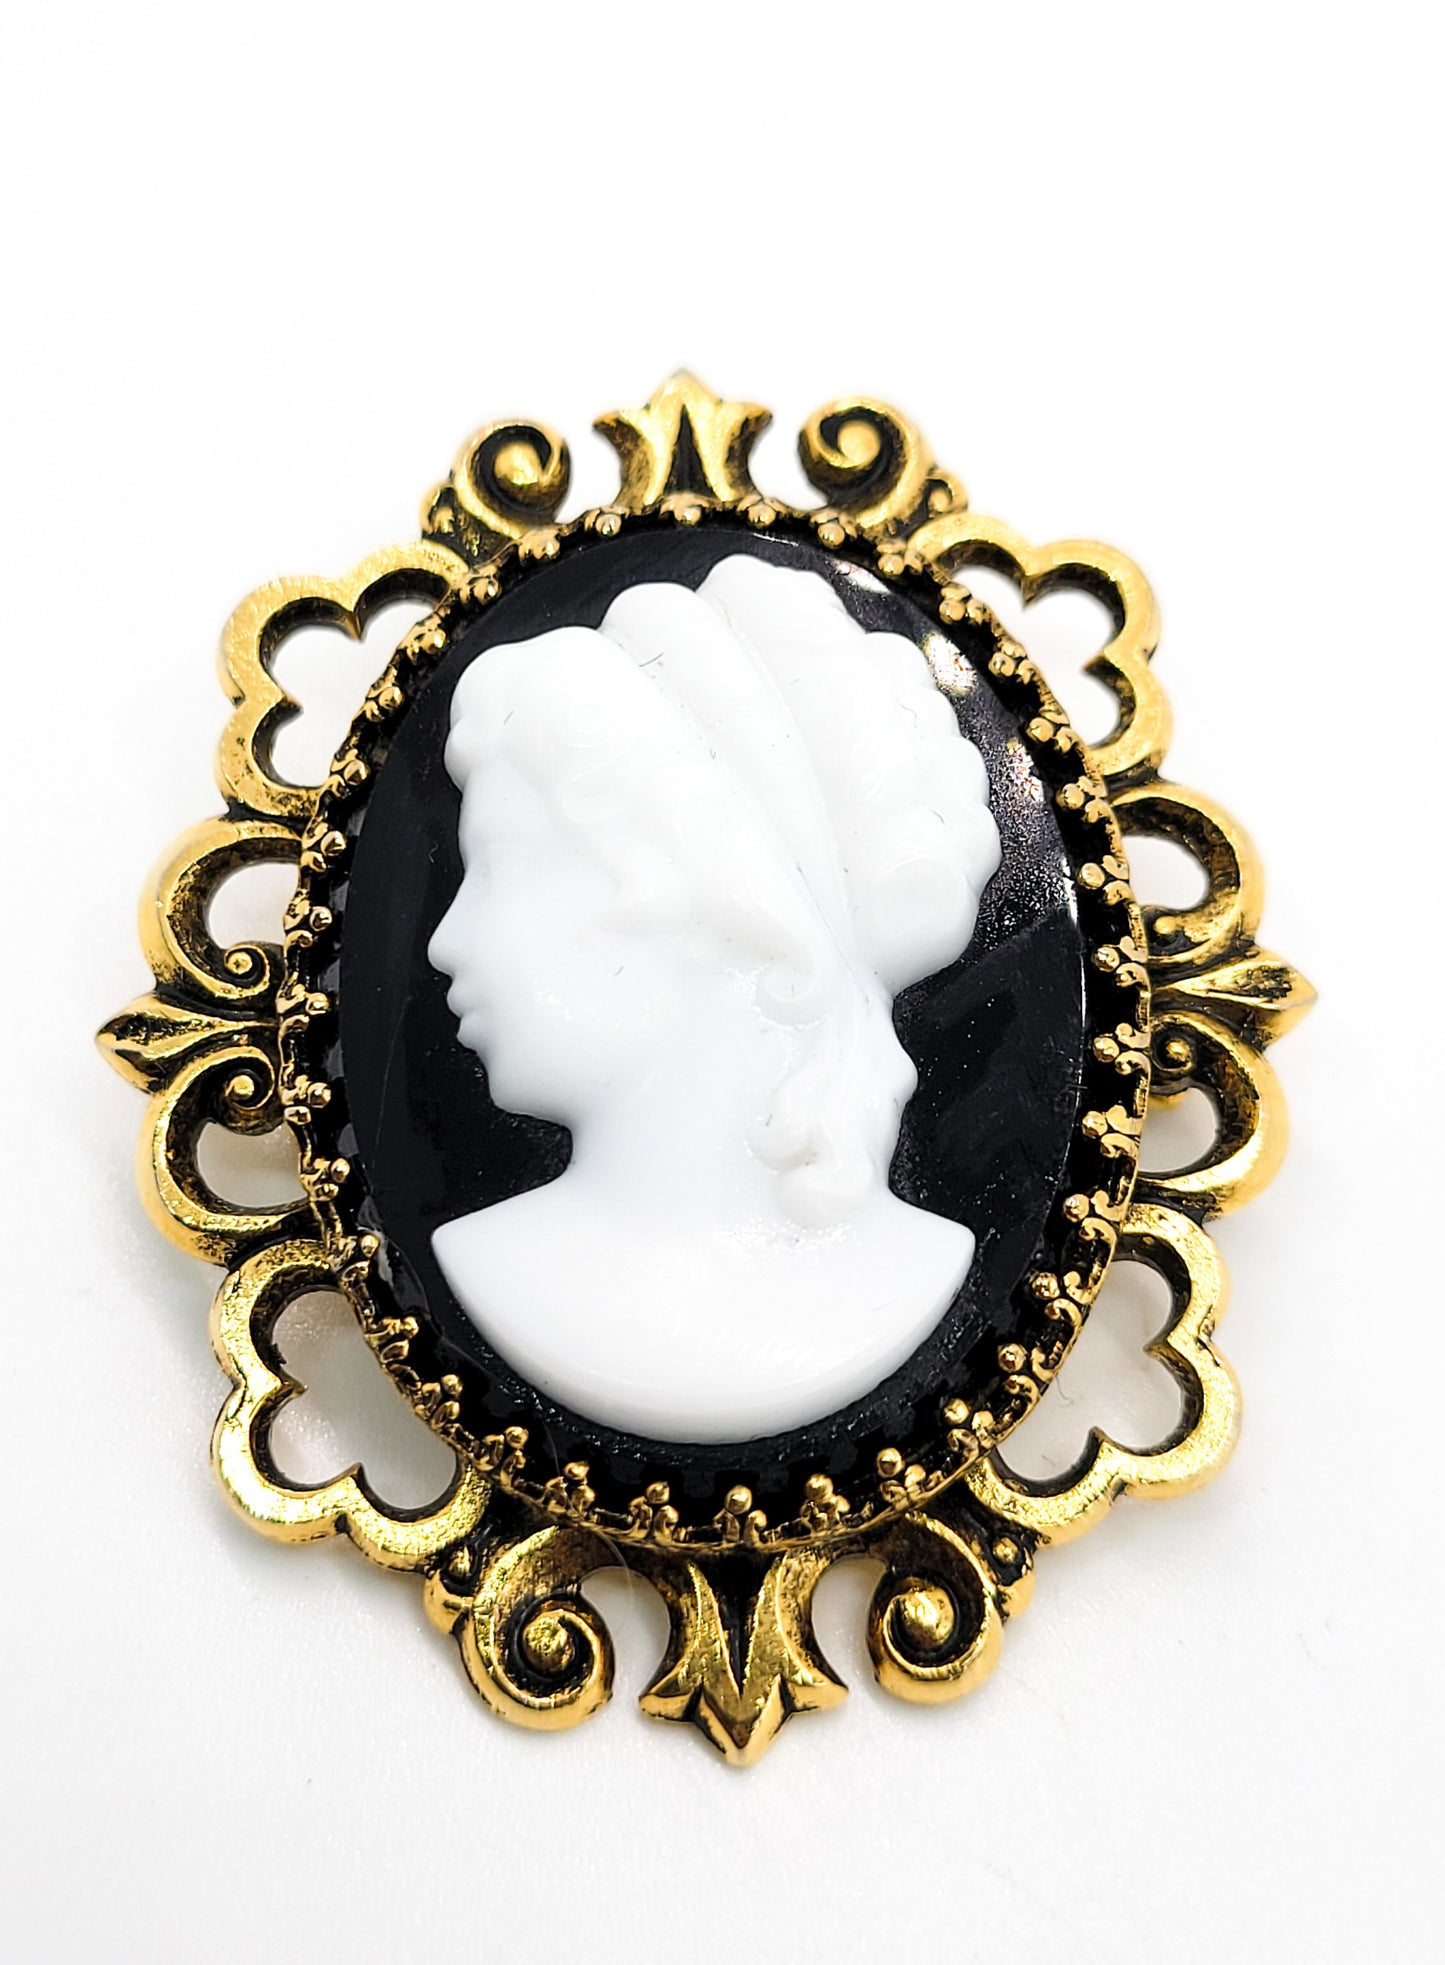 Victorian revival black and white glass cameo gold toned vintage pendant brooch pin